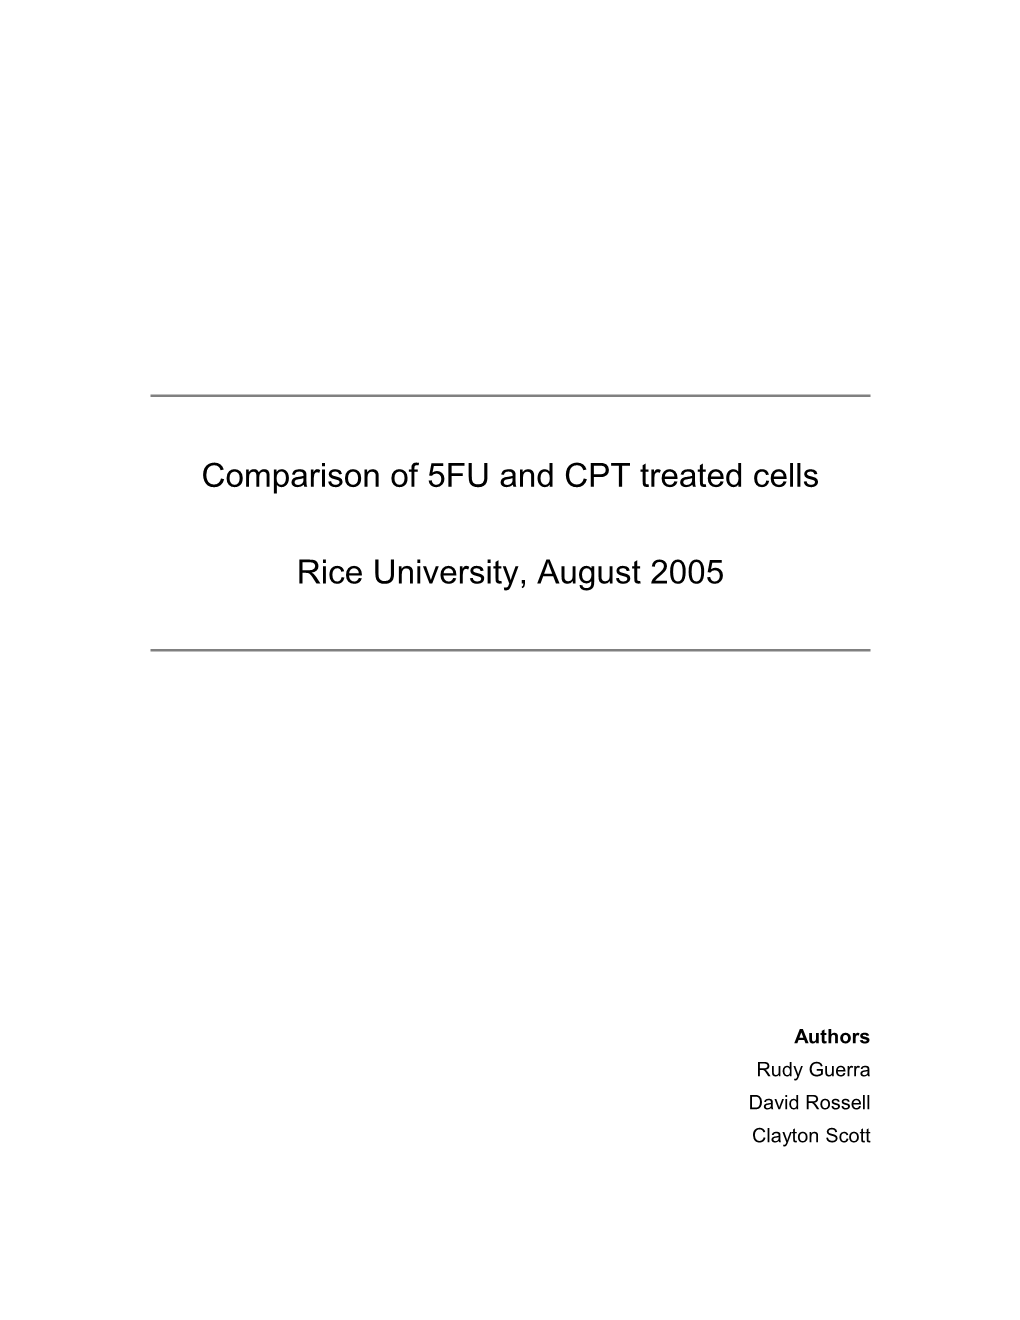 Comparison of 5FU and CPT Treated Cells